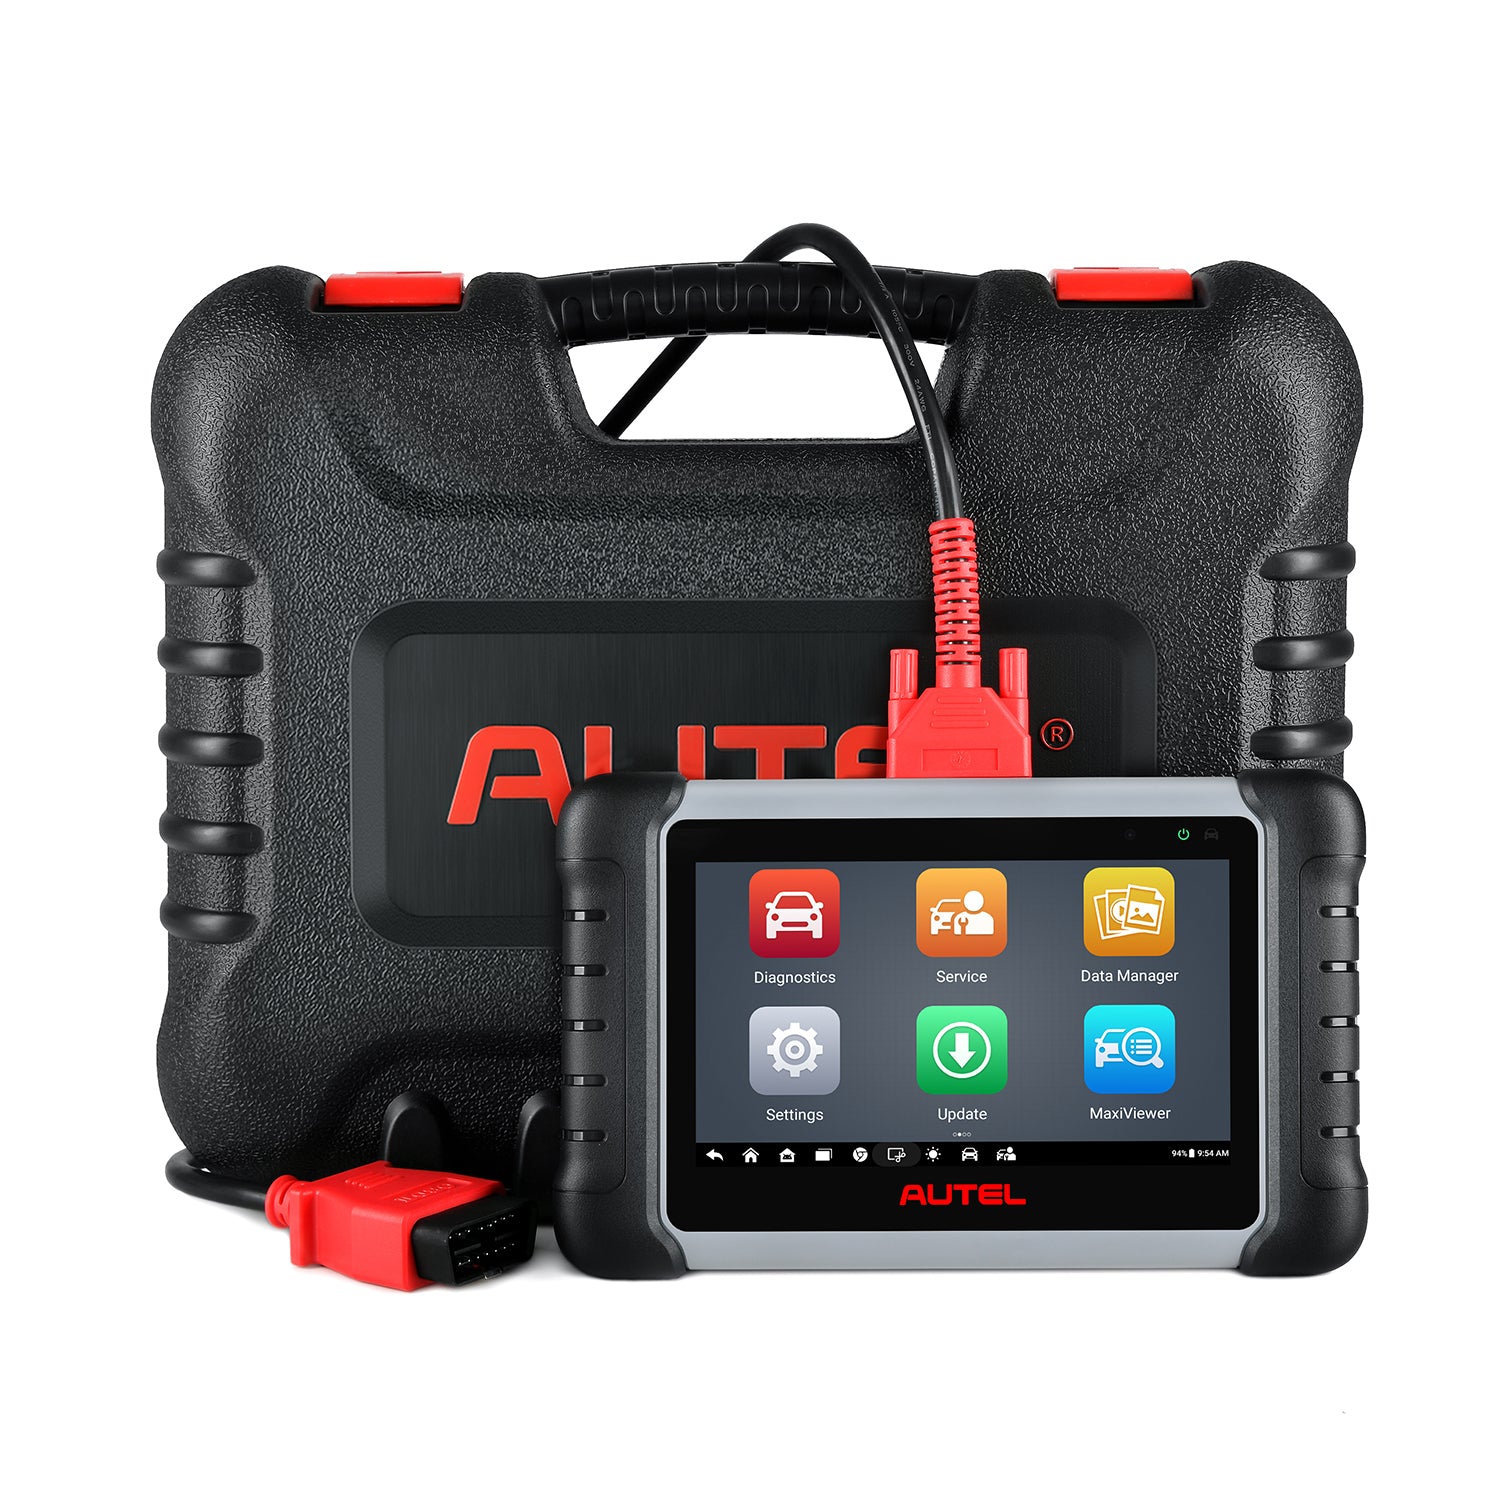 2023 Autel MaxiPRO MP808S KIT with Complete OBD1 Adapters